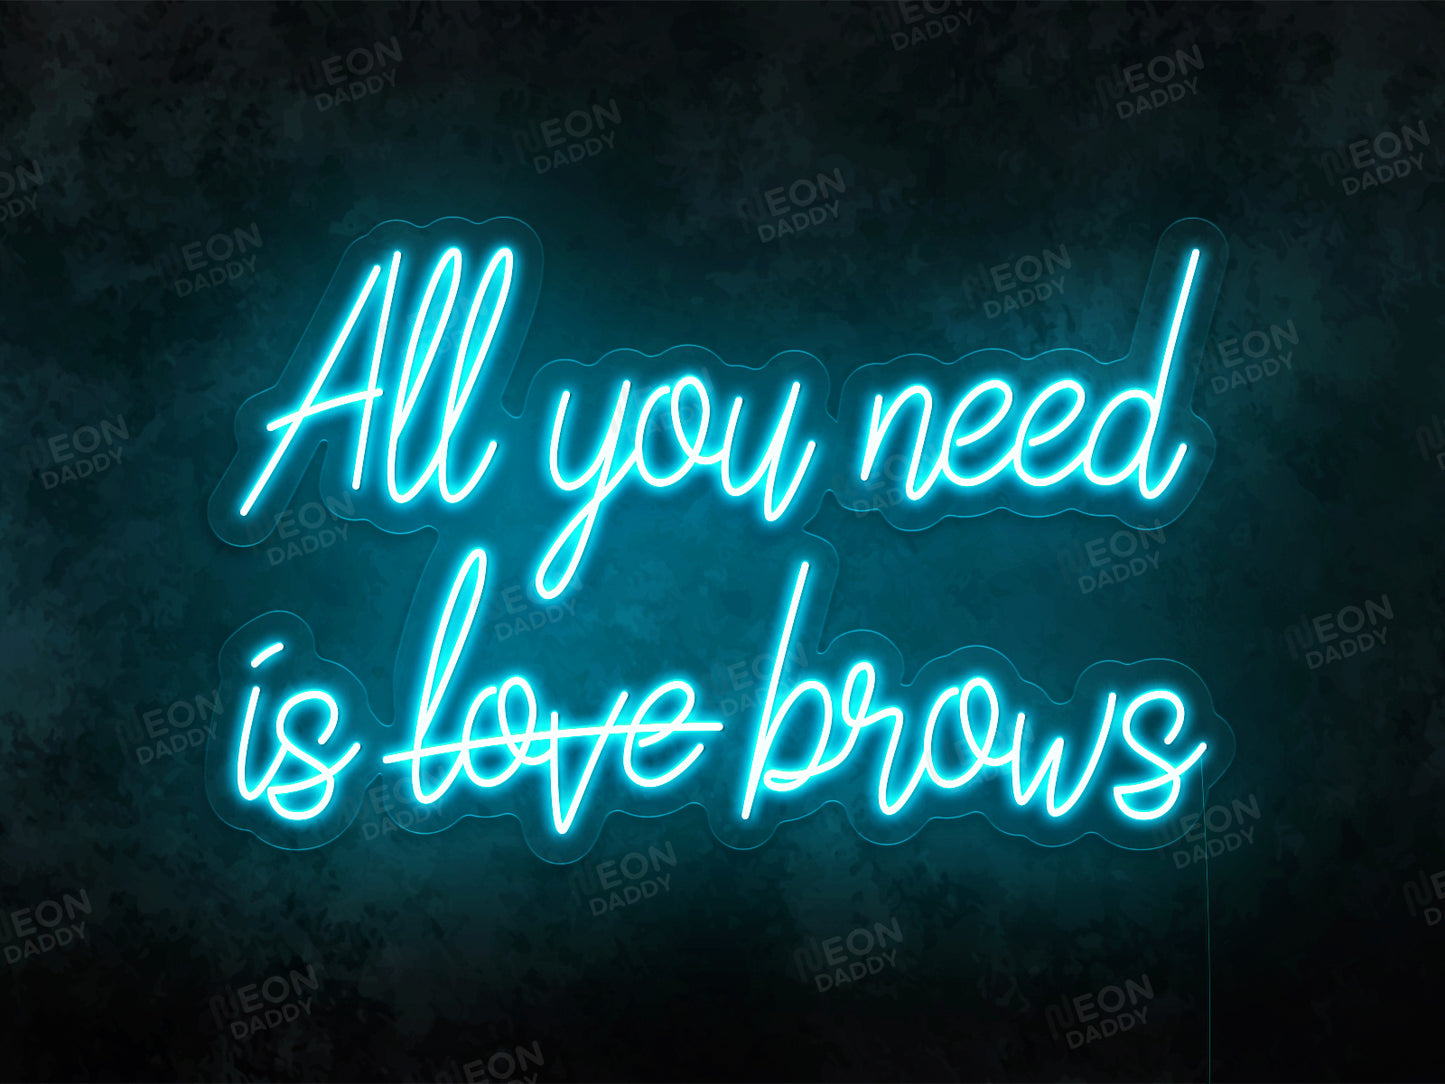 All you need is Brows LED Neon Sign